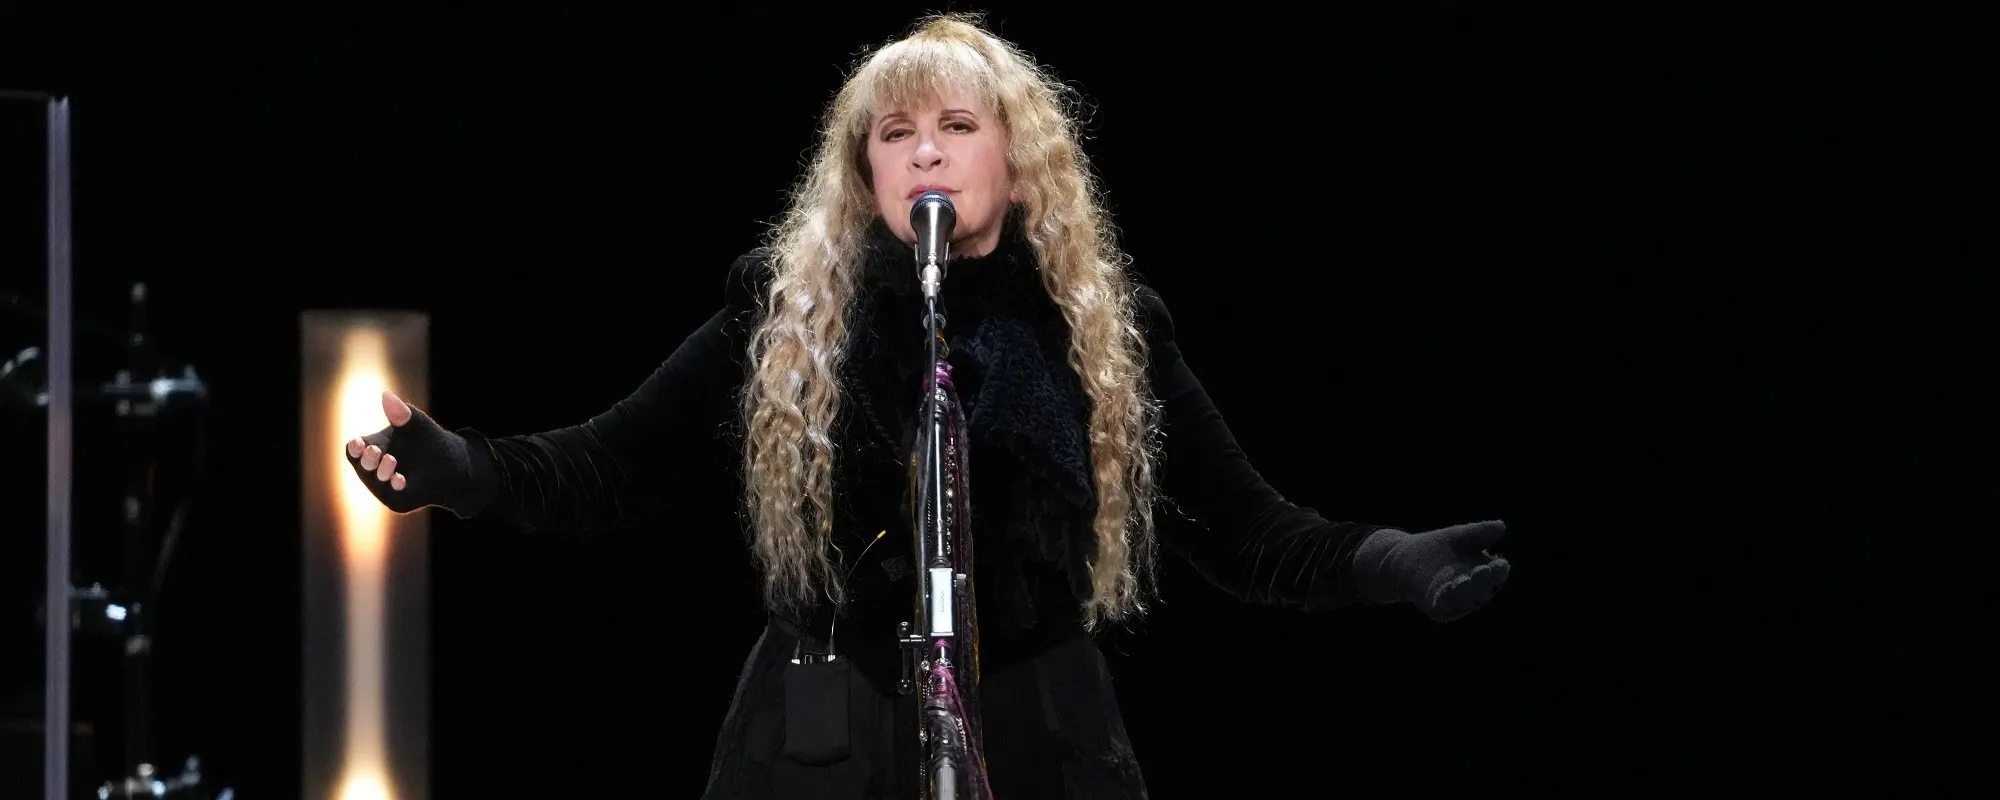 Find Out About the New Festival Stevie Nicks, Post Malone, and Noah Kahan Are Headlining Next Year